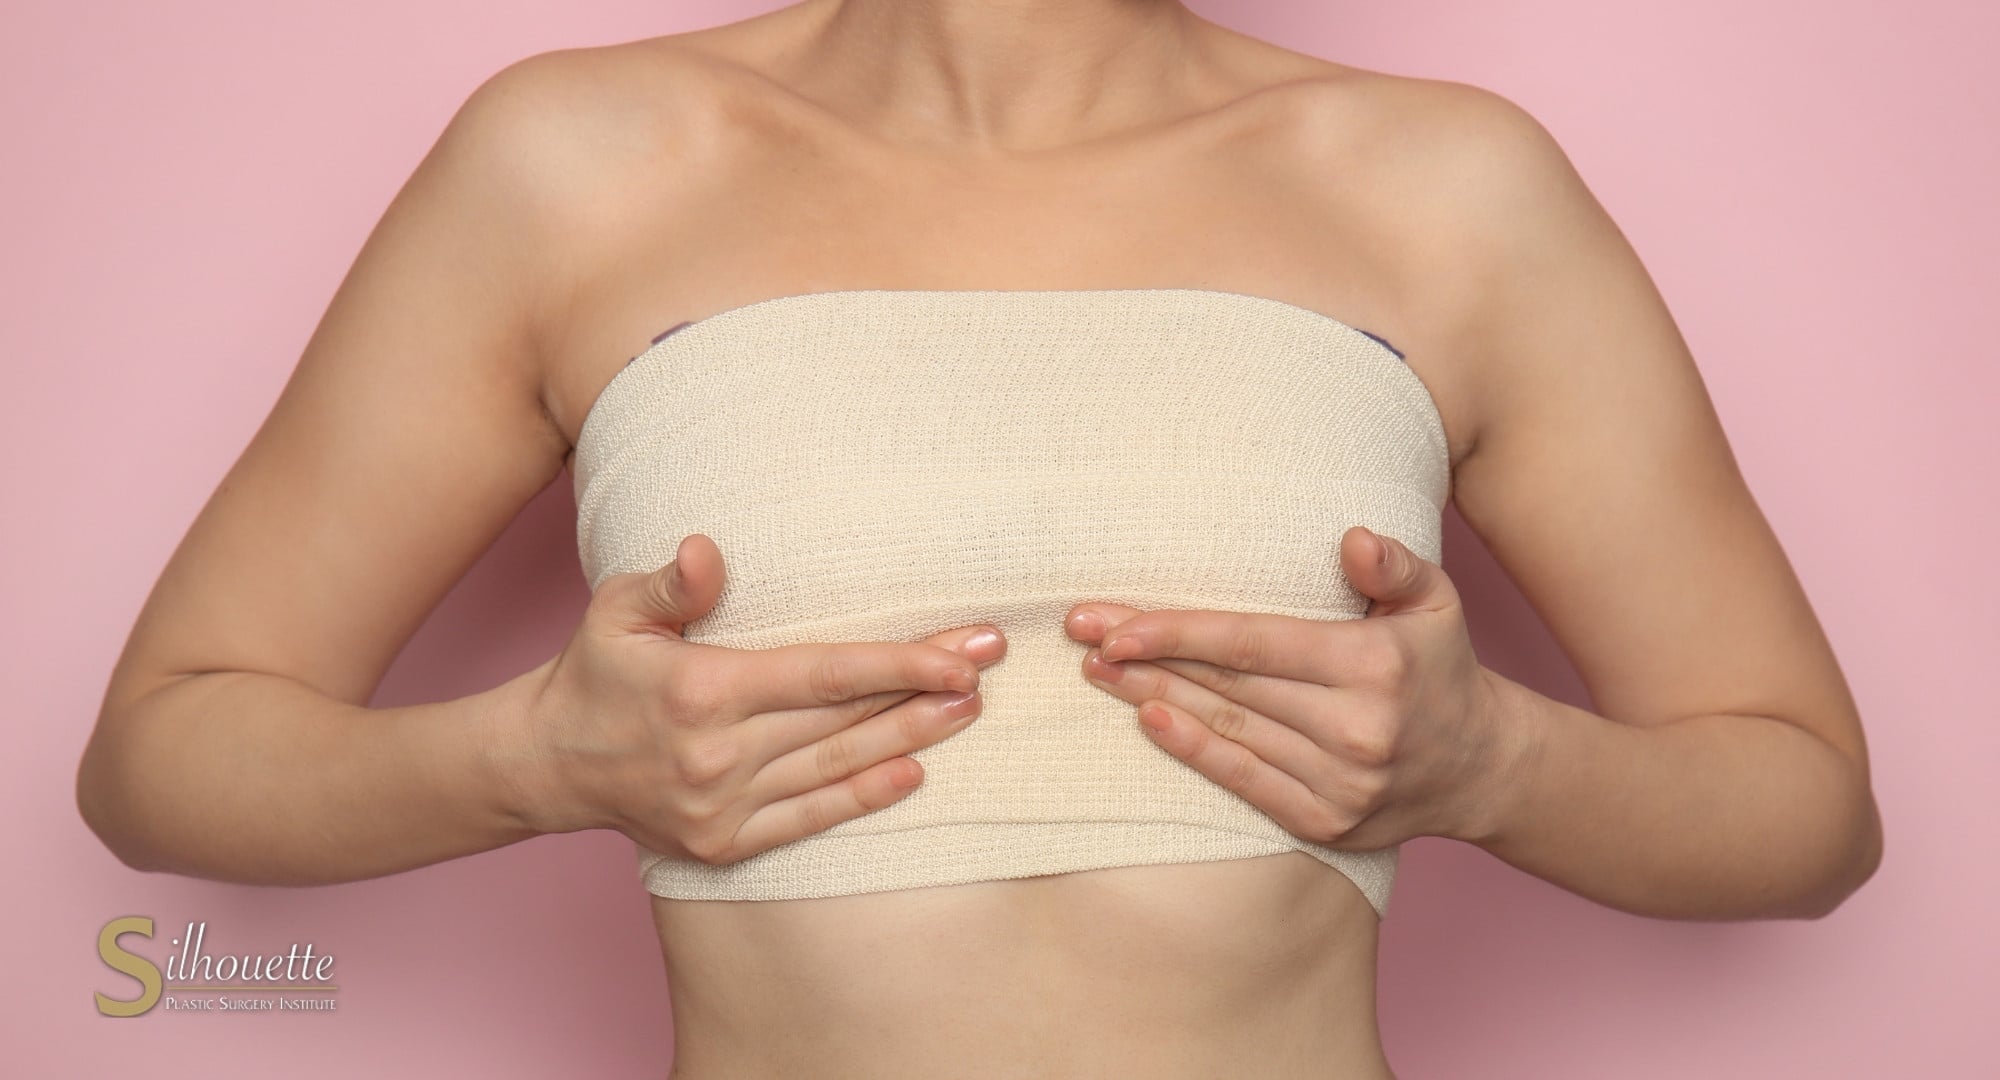 Adding Implants to a Breast Lift – Yes or No? - The Plastic